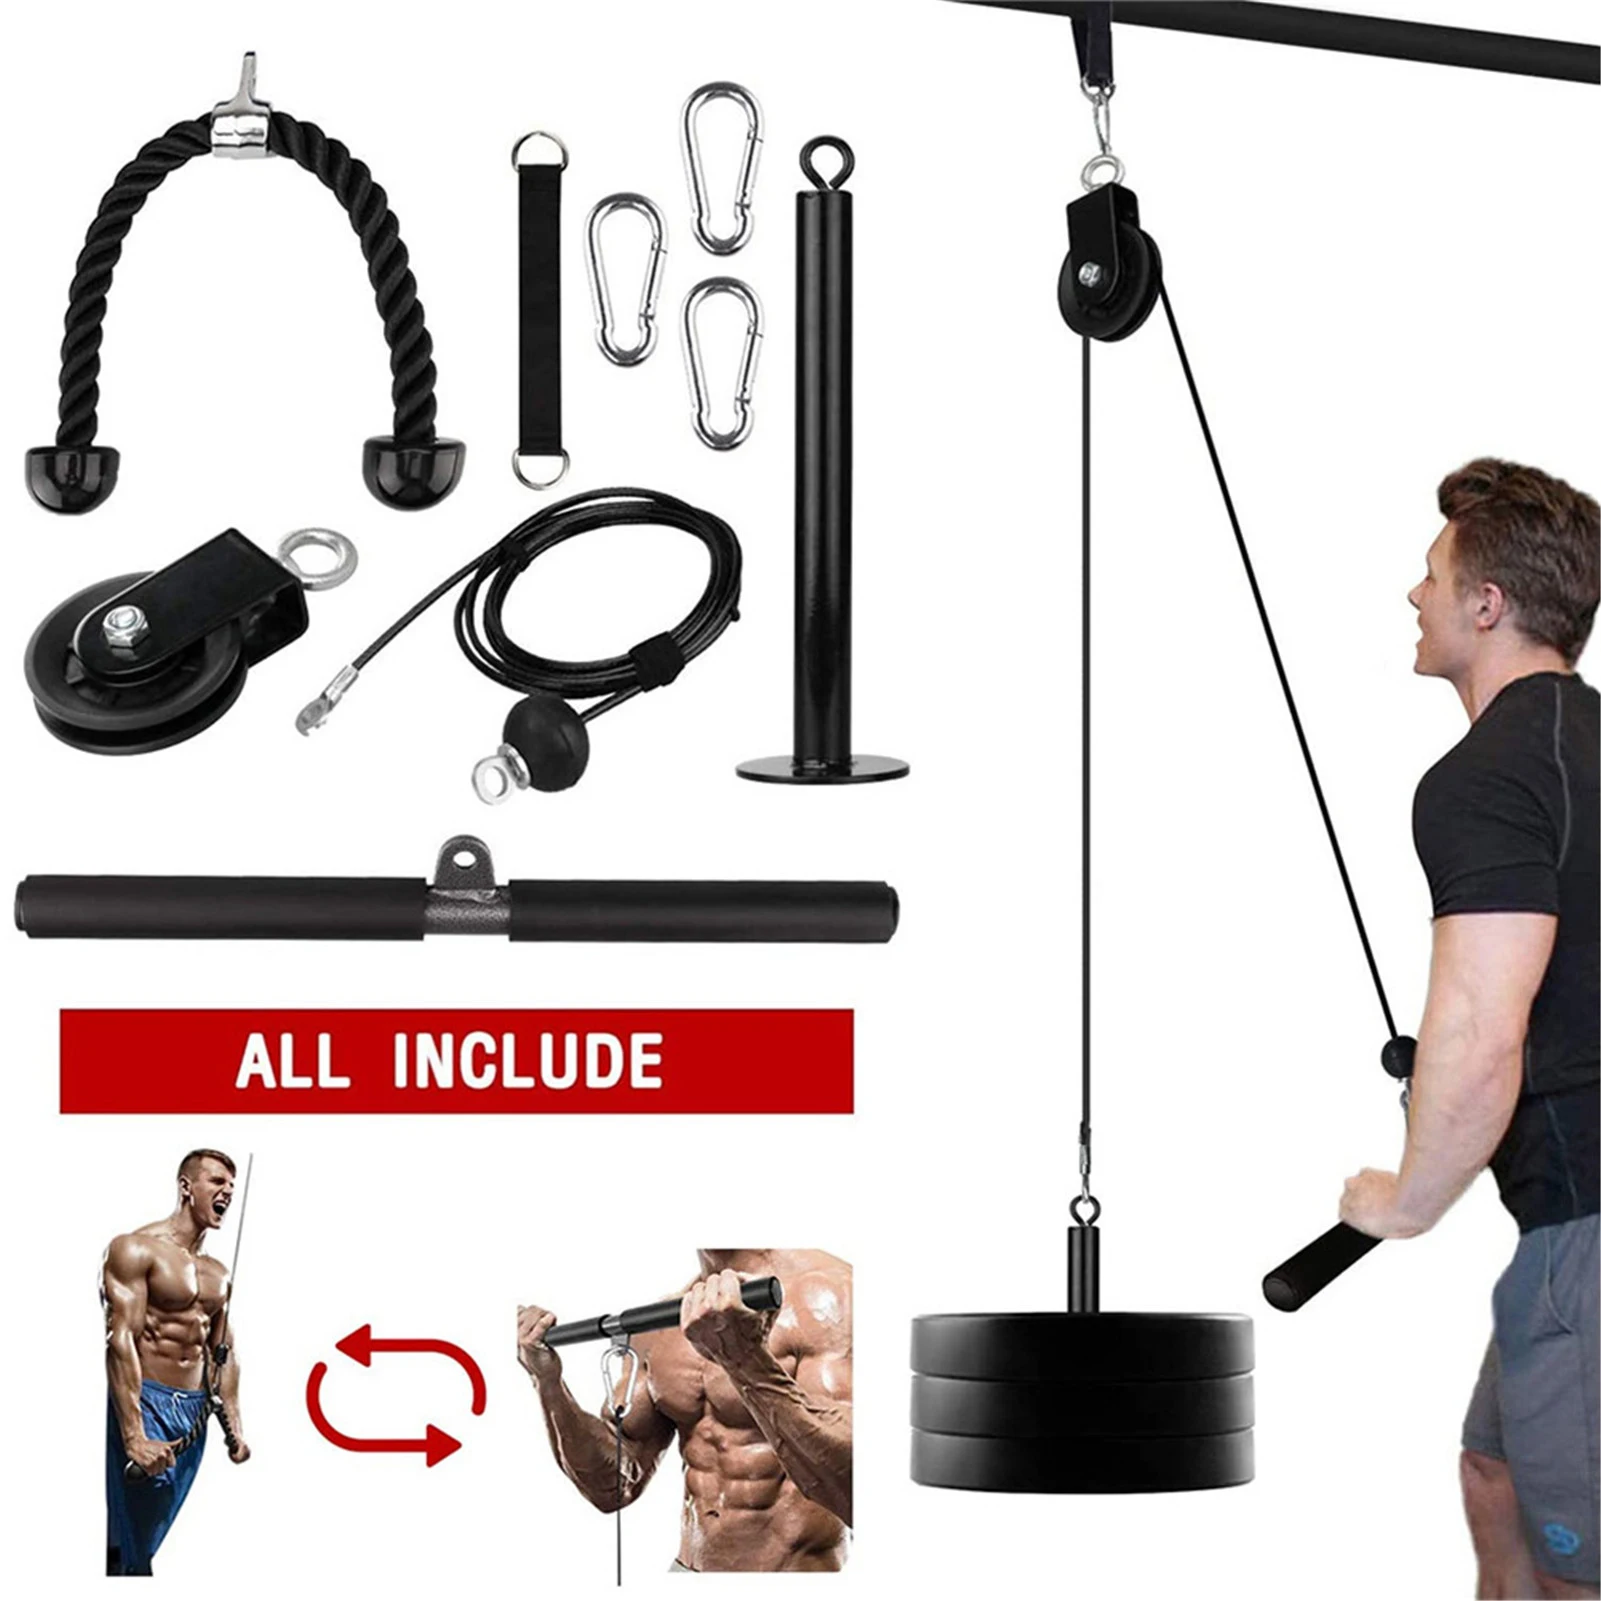 Fitness Pulley Cable Gym Workout DIY Equipment Lifting Machine Attachment System 